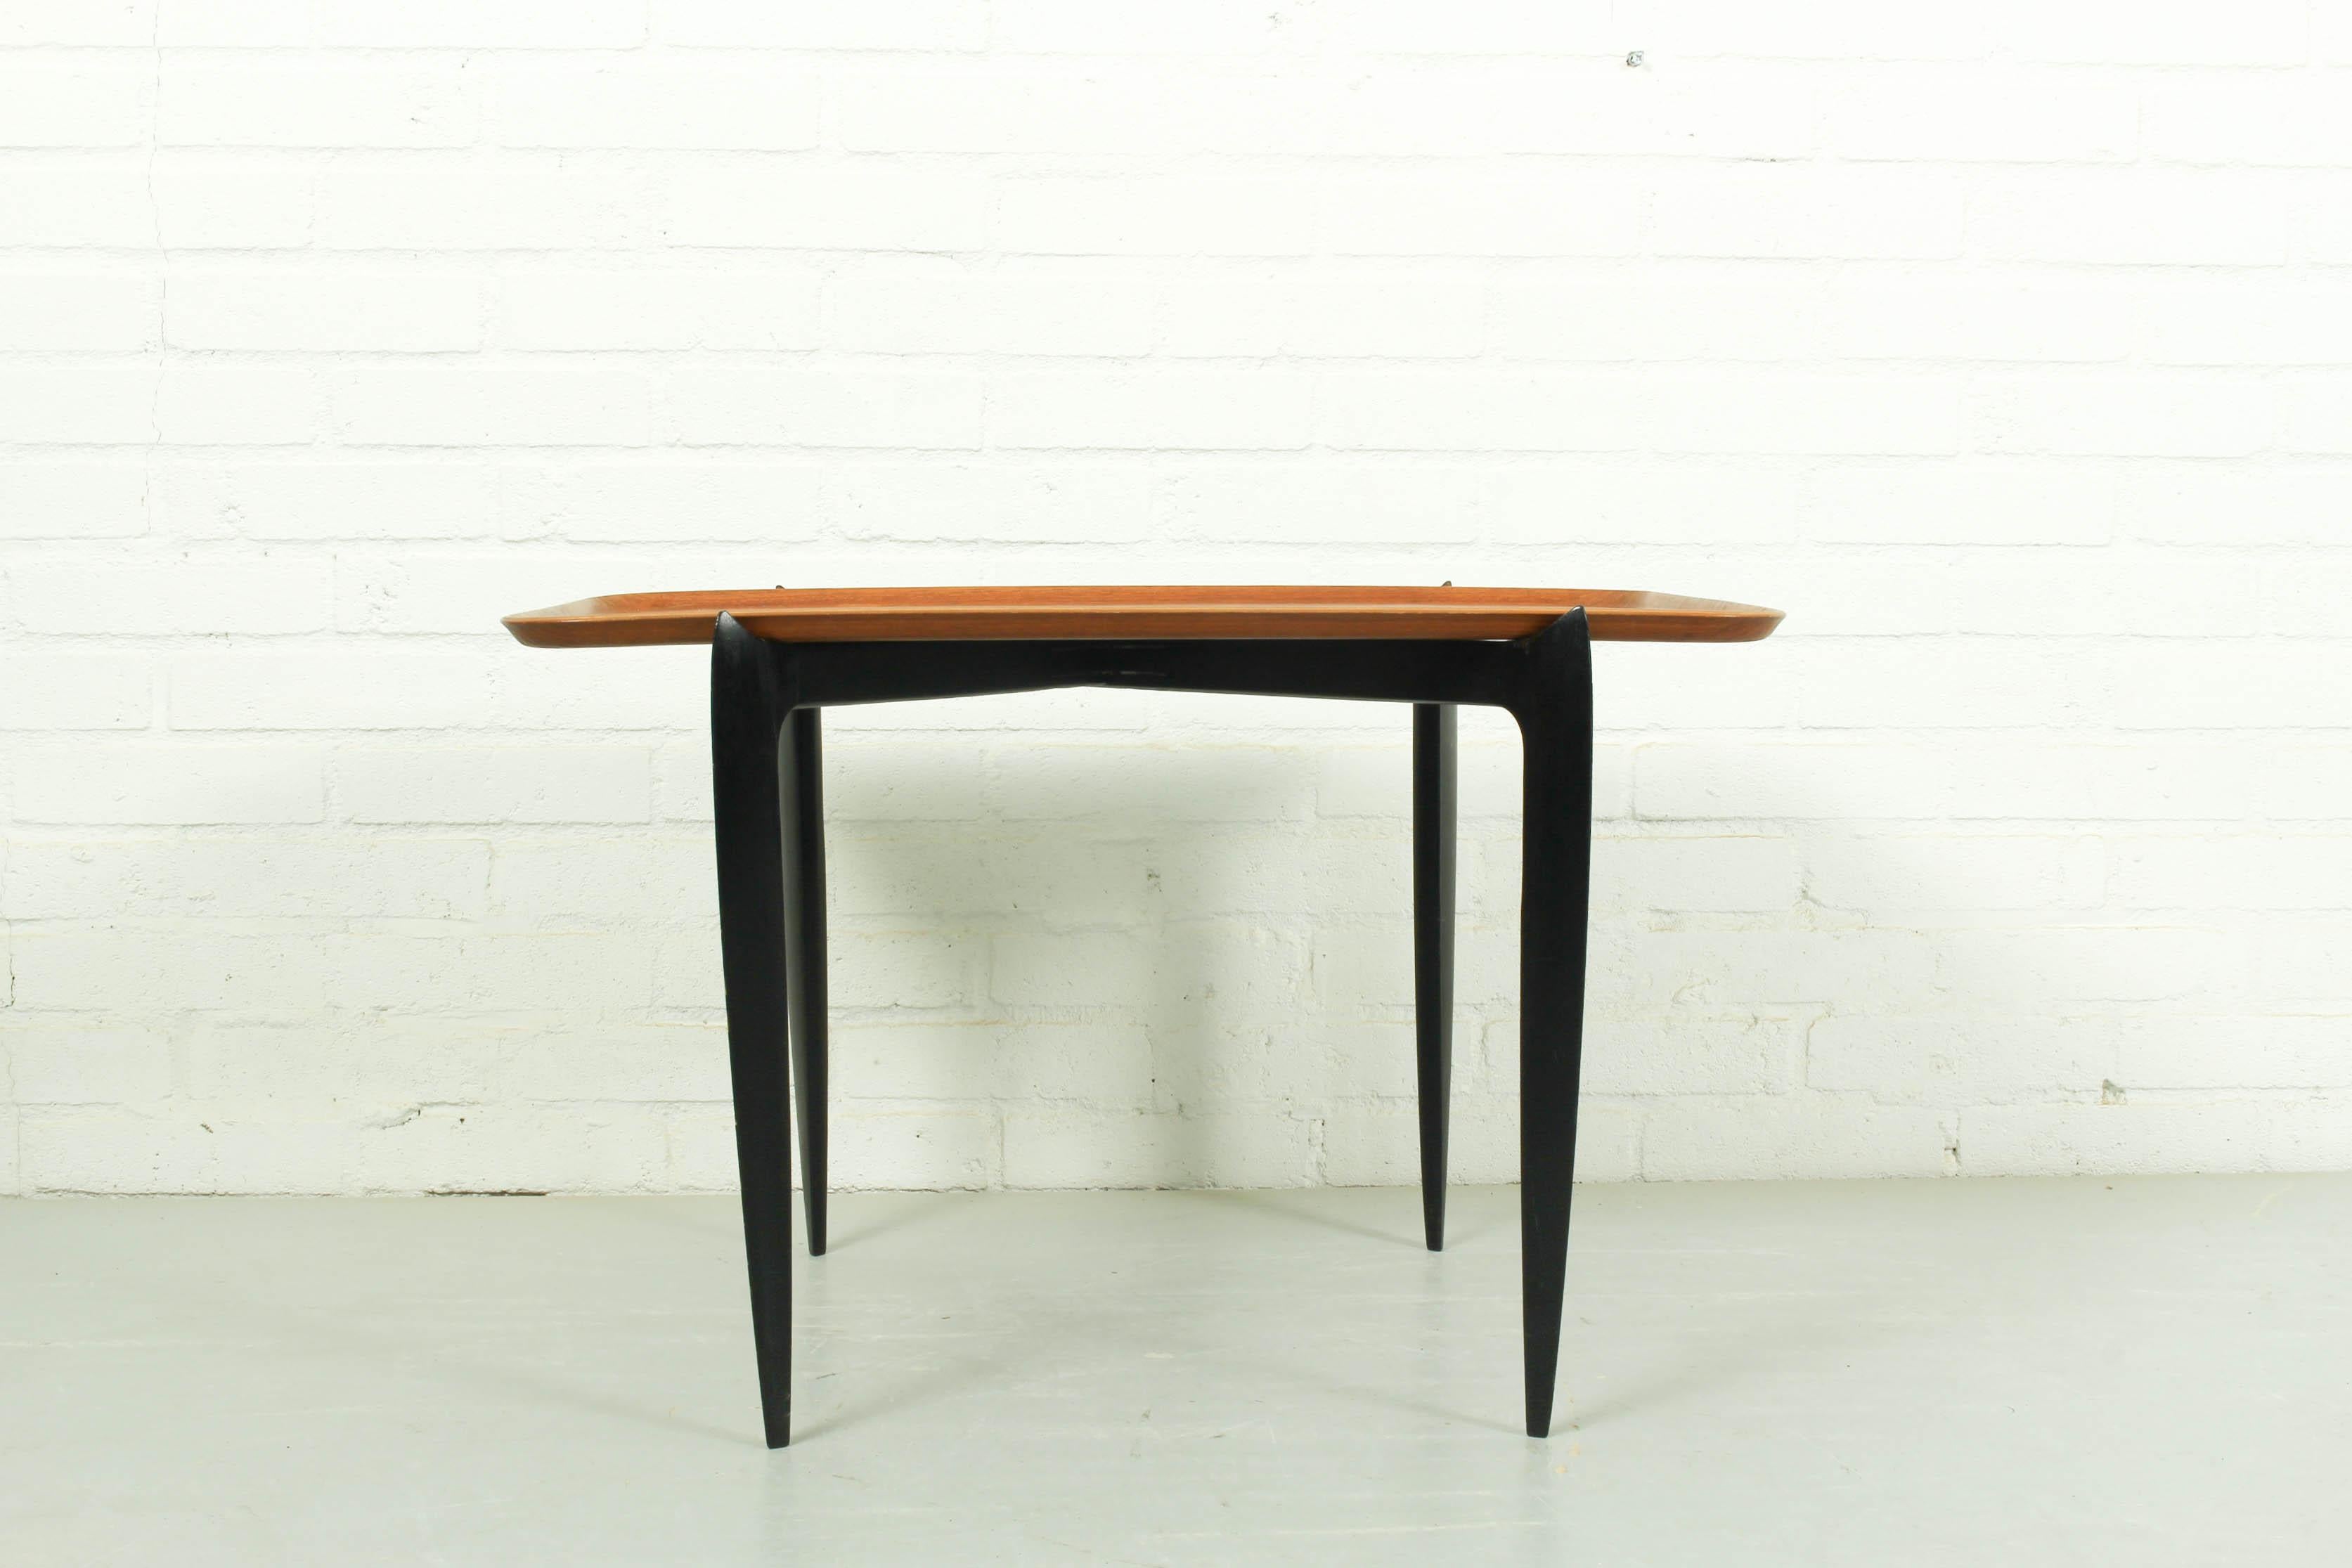 Rectangle tray side table designed by Svend Åge Willumsen & Hans Engholm for Fritz Hansen, Denmark 1950. It has a teak tray top, black wooden base with a folding mechanism. The table is an early version and made in very limited numbers. It’s marked